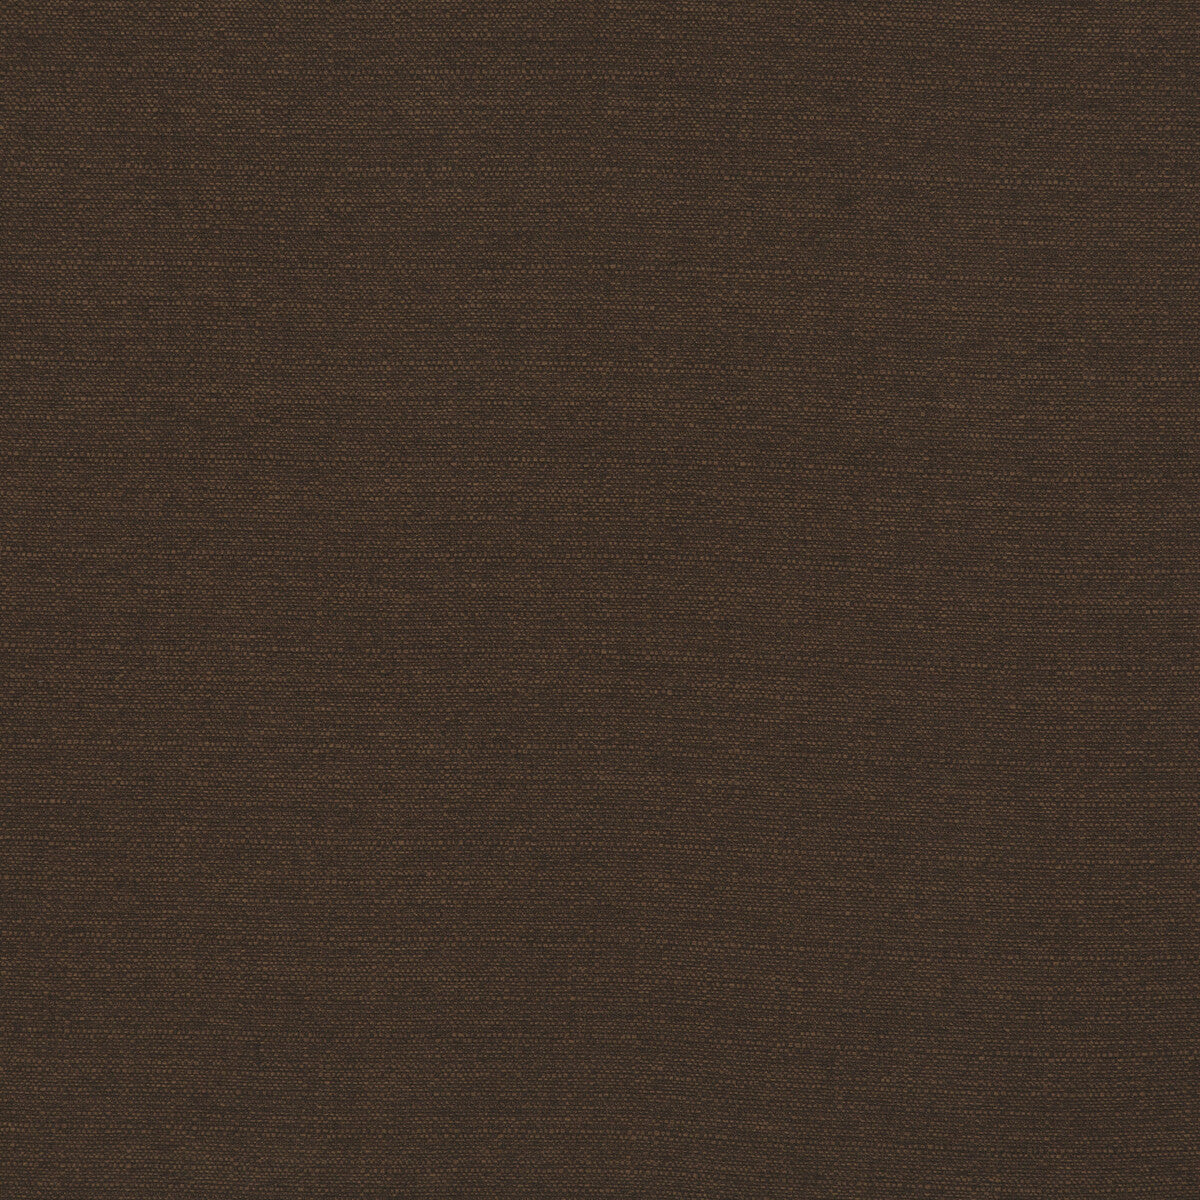 Lansdowne fabric in mahogany color - pattern PF50413.265.0 - by Baker Lifestyle in the Notebooks collection